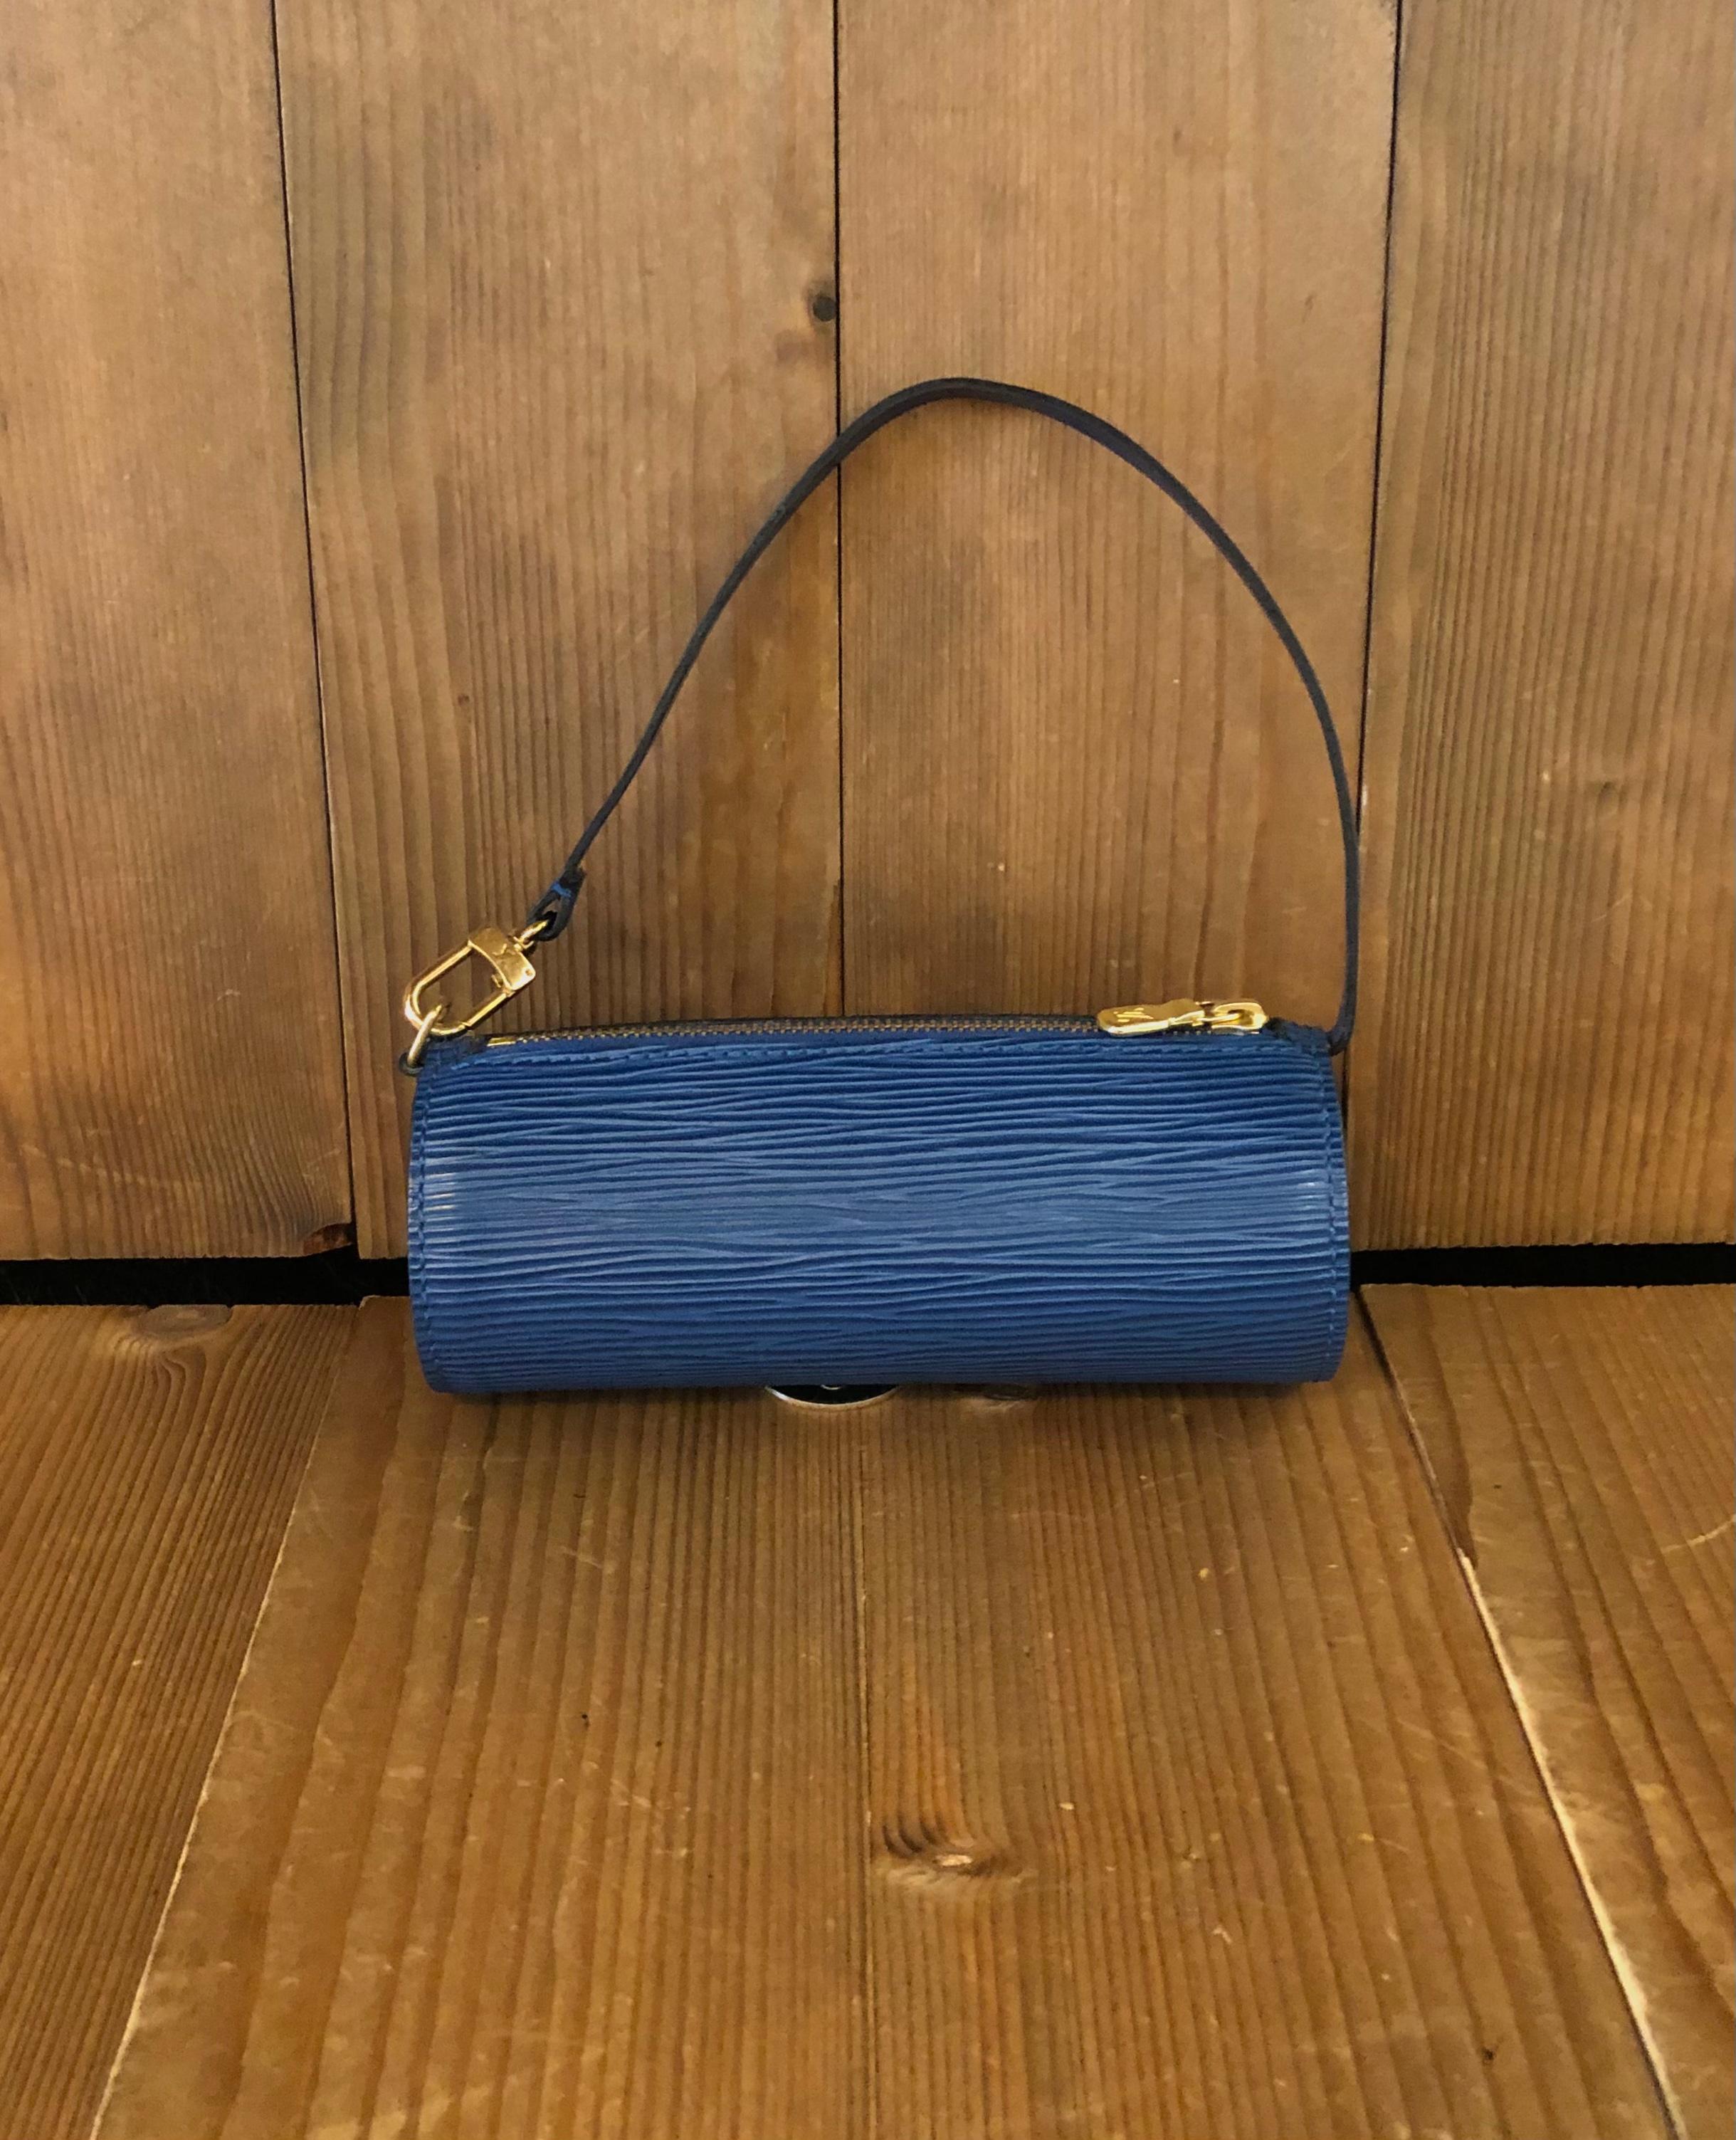 1990s LOUIS VUITTON mini Papillon pouch in blue Epi leather. It originally came with the mother Papillon bag. Made in France. Measures 6.25”x 2.25”x 2.25”. Comes with complimentary non-LV chain.

Condition - Minor signs of wear. Generally in very